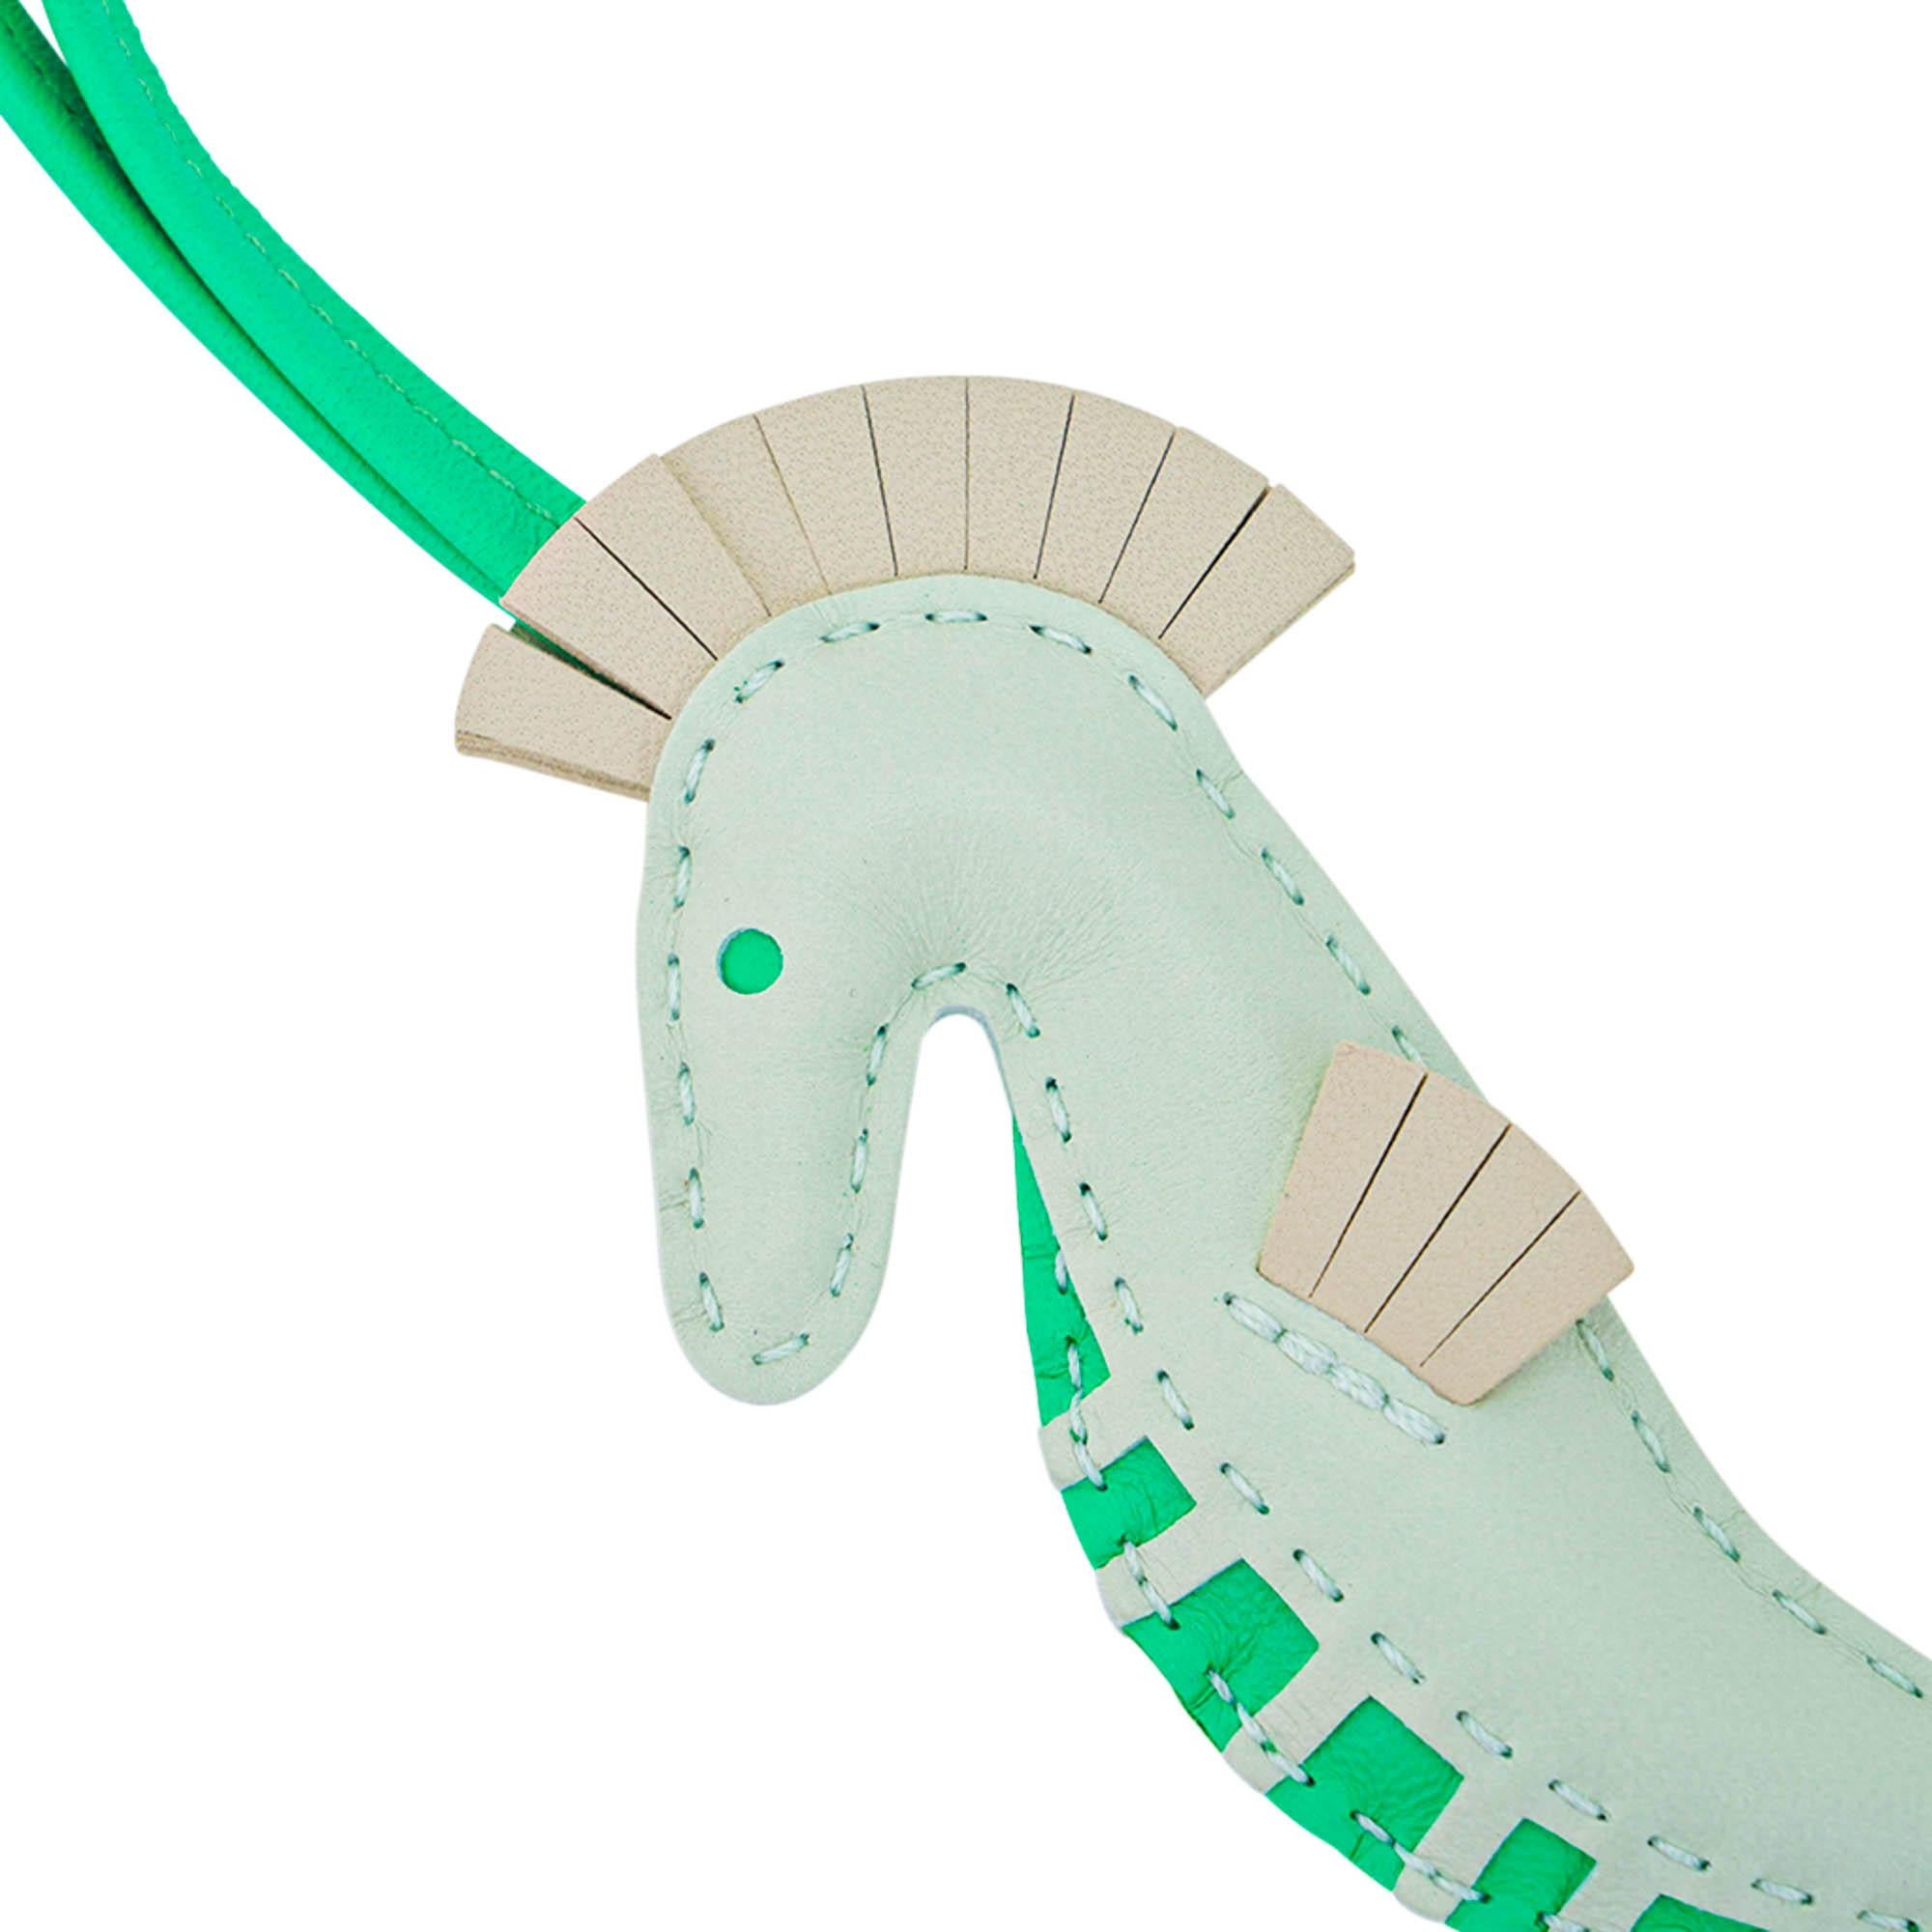 Mightychic offers a limited edition Hermes Seahorse  charm featured in Vert Fizz, Vert Comics and Beton.
Beautifully detailed in Milo lambskin, a leather originally used for gloves.
The name Milo refers to the Venus de Milo, evoking its beauty and